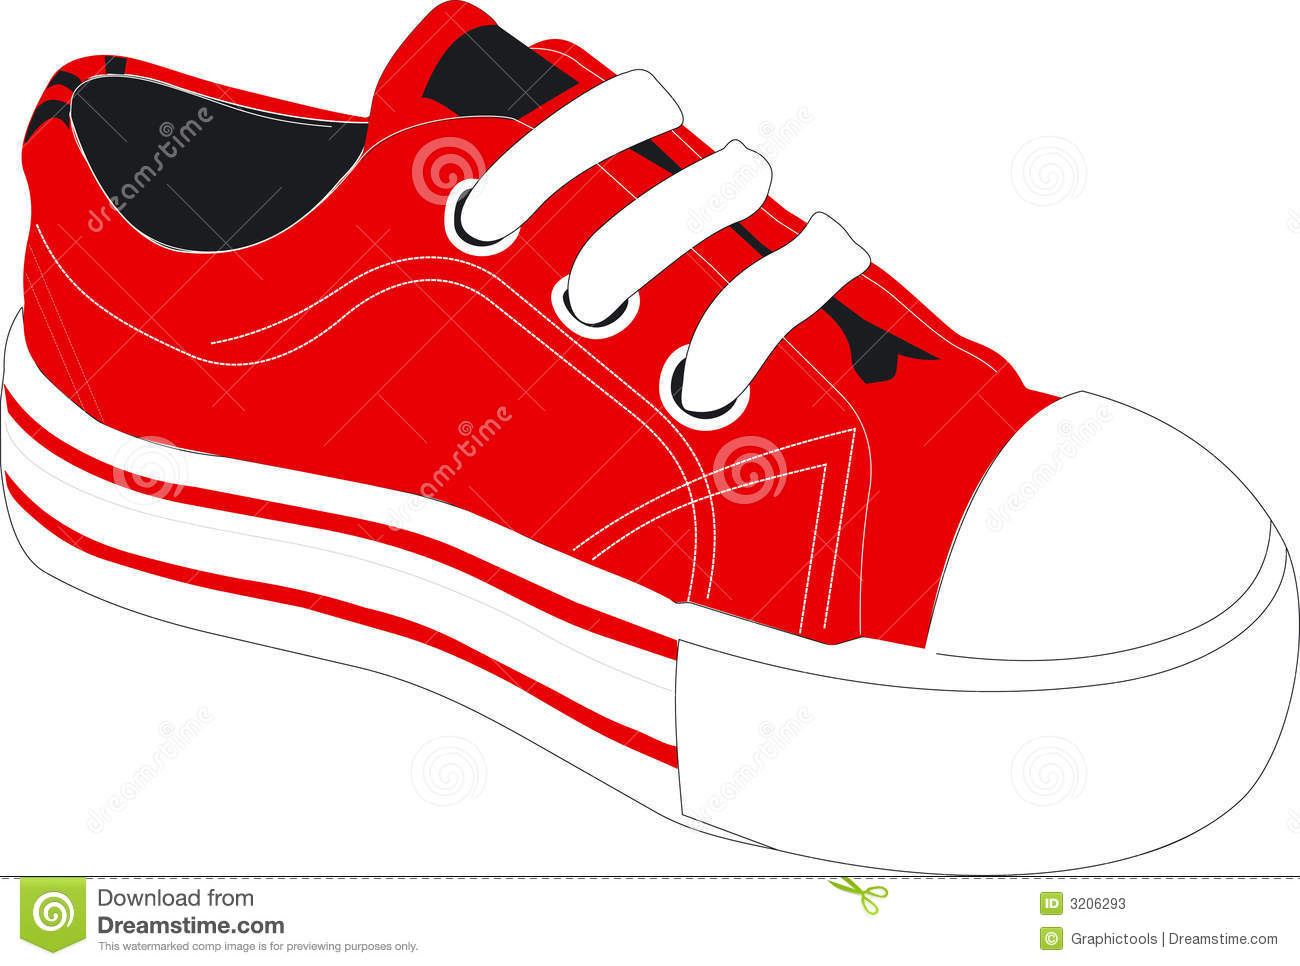 Illustration Of A Bright Red Sneaker Tennis Or Athletic Shoe